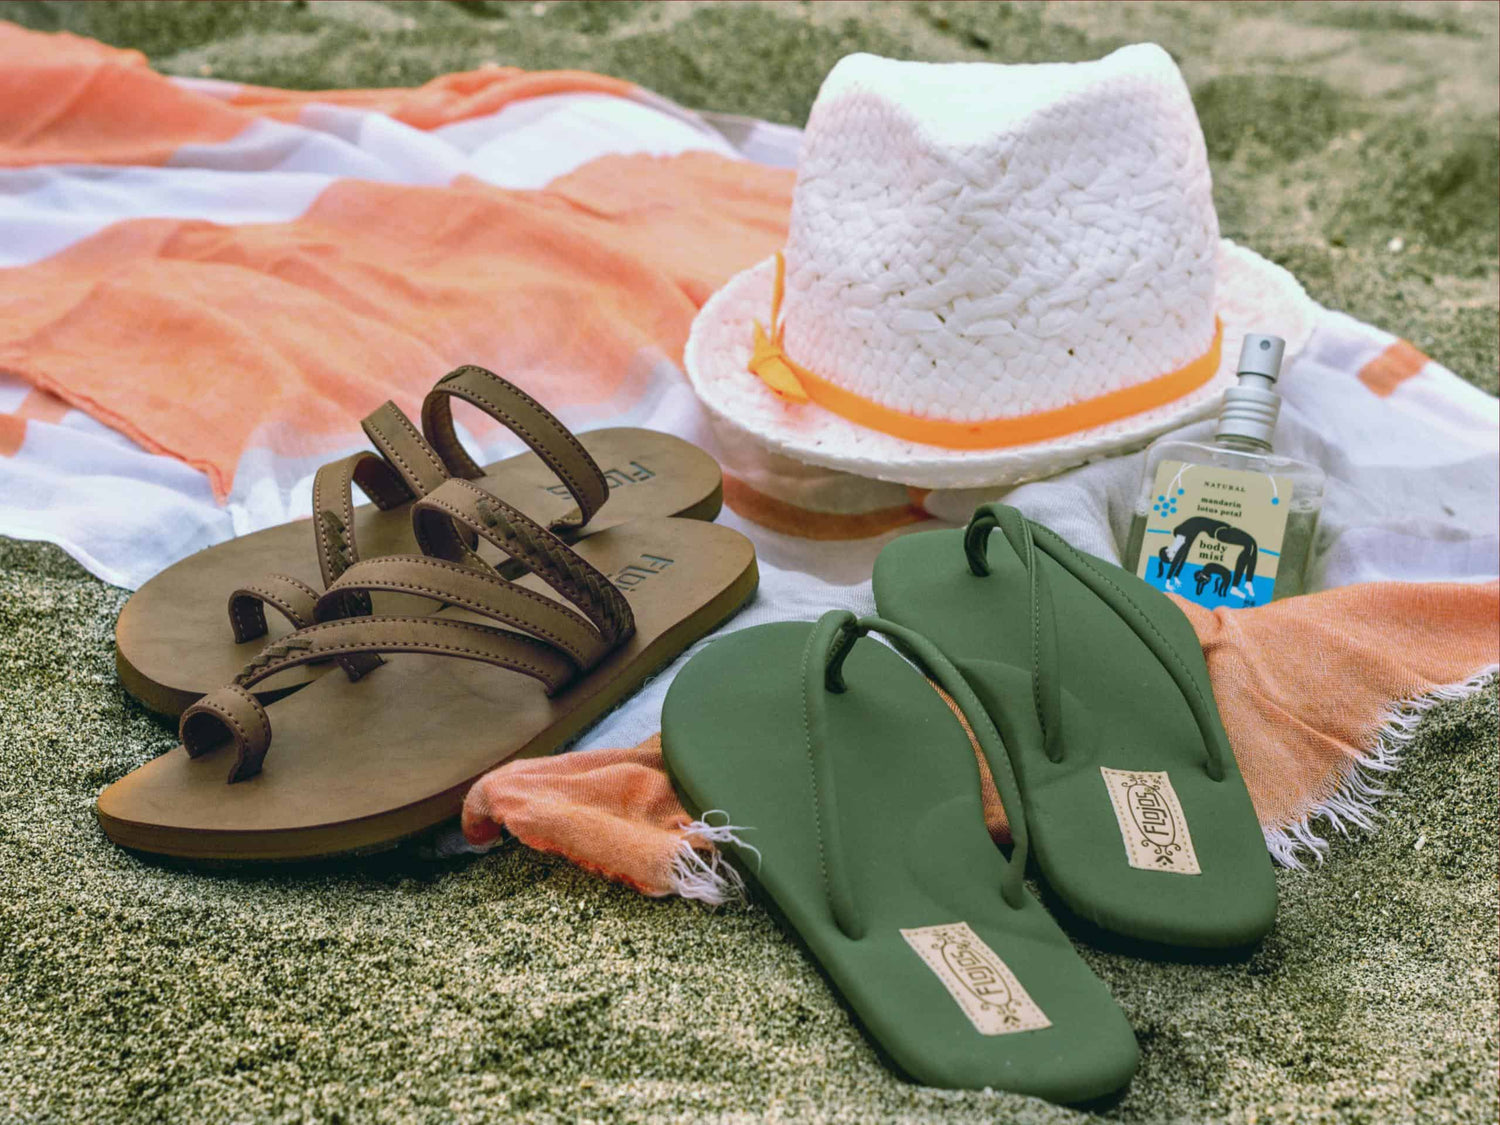 Sandals vs. Flip Flops: What's the Difference?